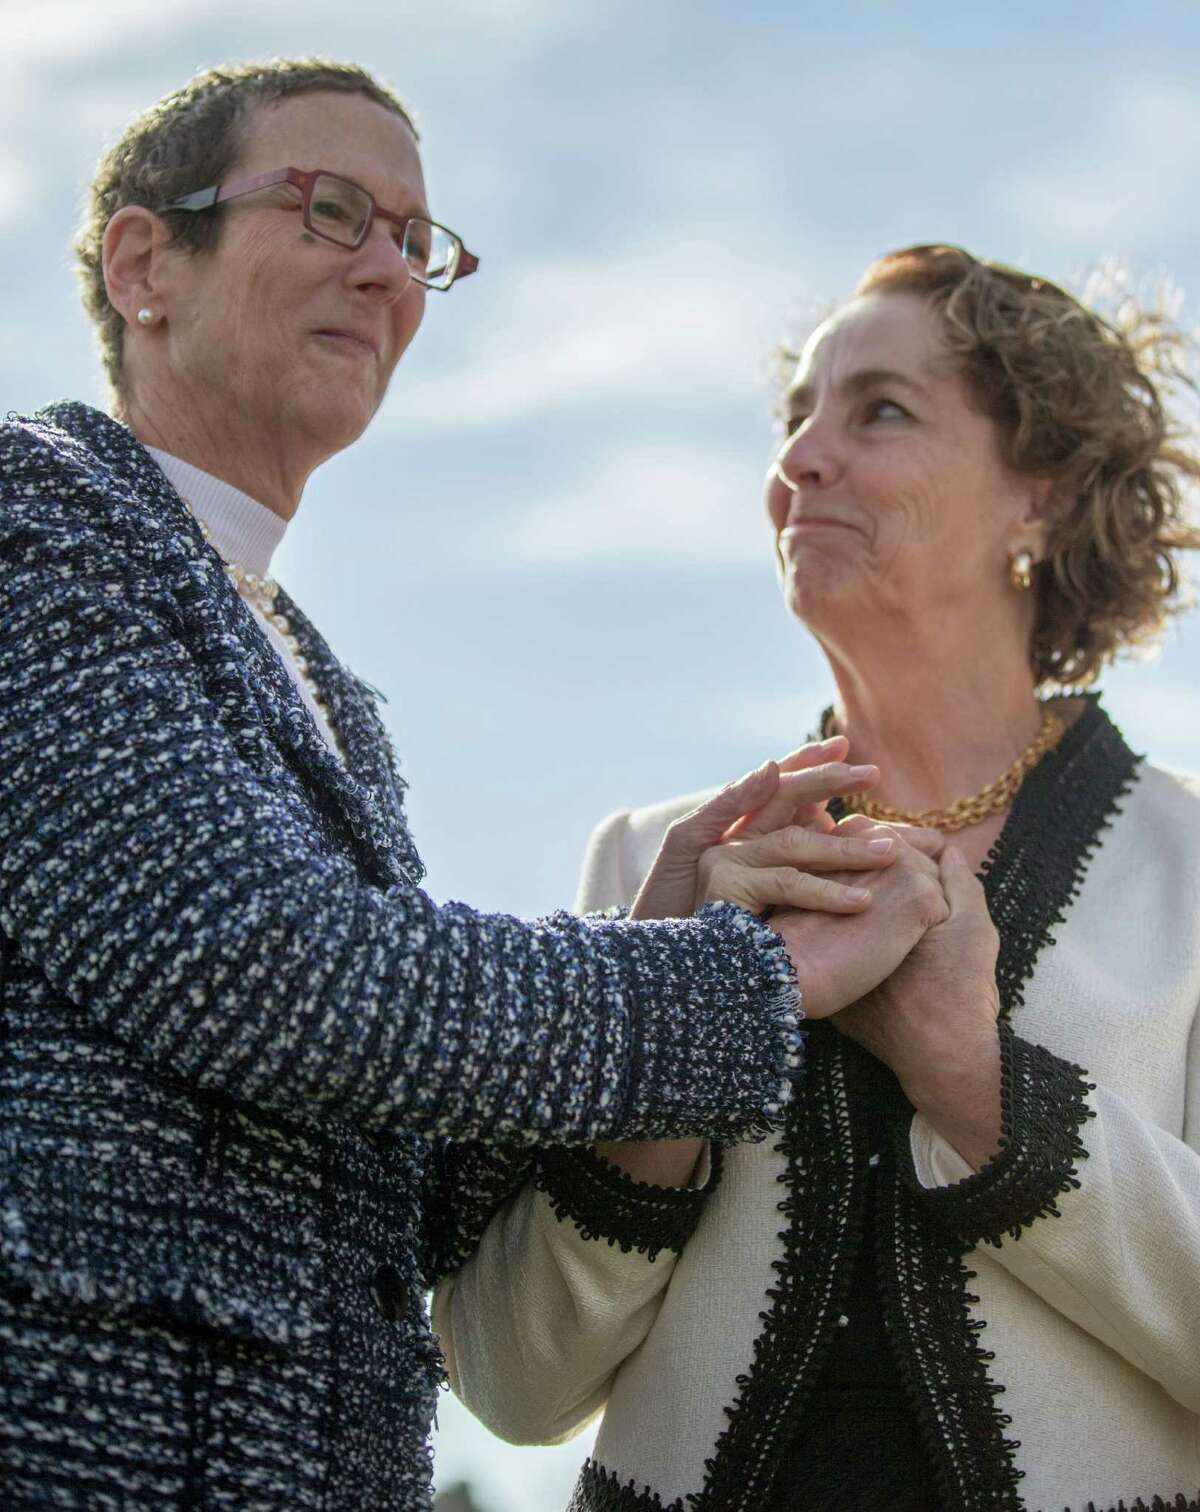 Suzanne Bryant, right, and Sarah Goodfriend hold hands as they wait for the wedding ceremony to begin with Rabbi Kerry Baker outside of the Travis County Clerk's office in Austin, Texas on Thursday morning. (AP Photo/Austin American-Statesman, Ricardo B. Brazziell)